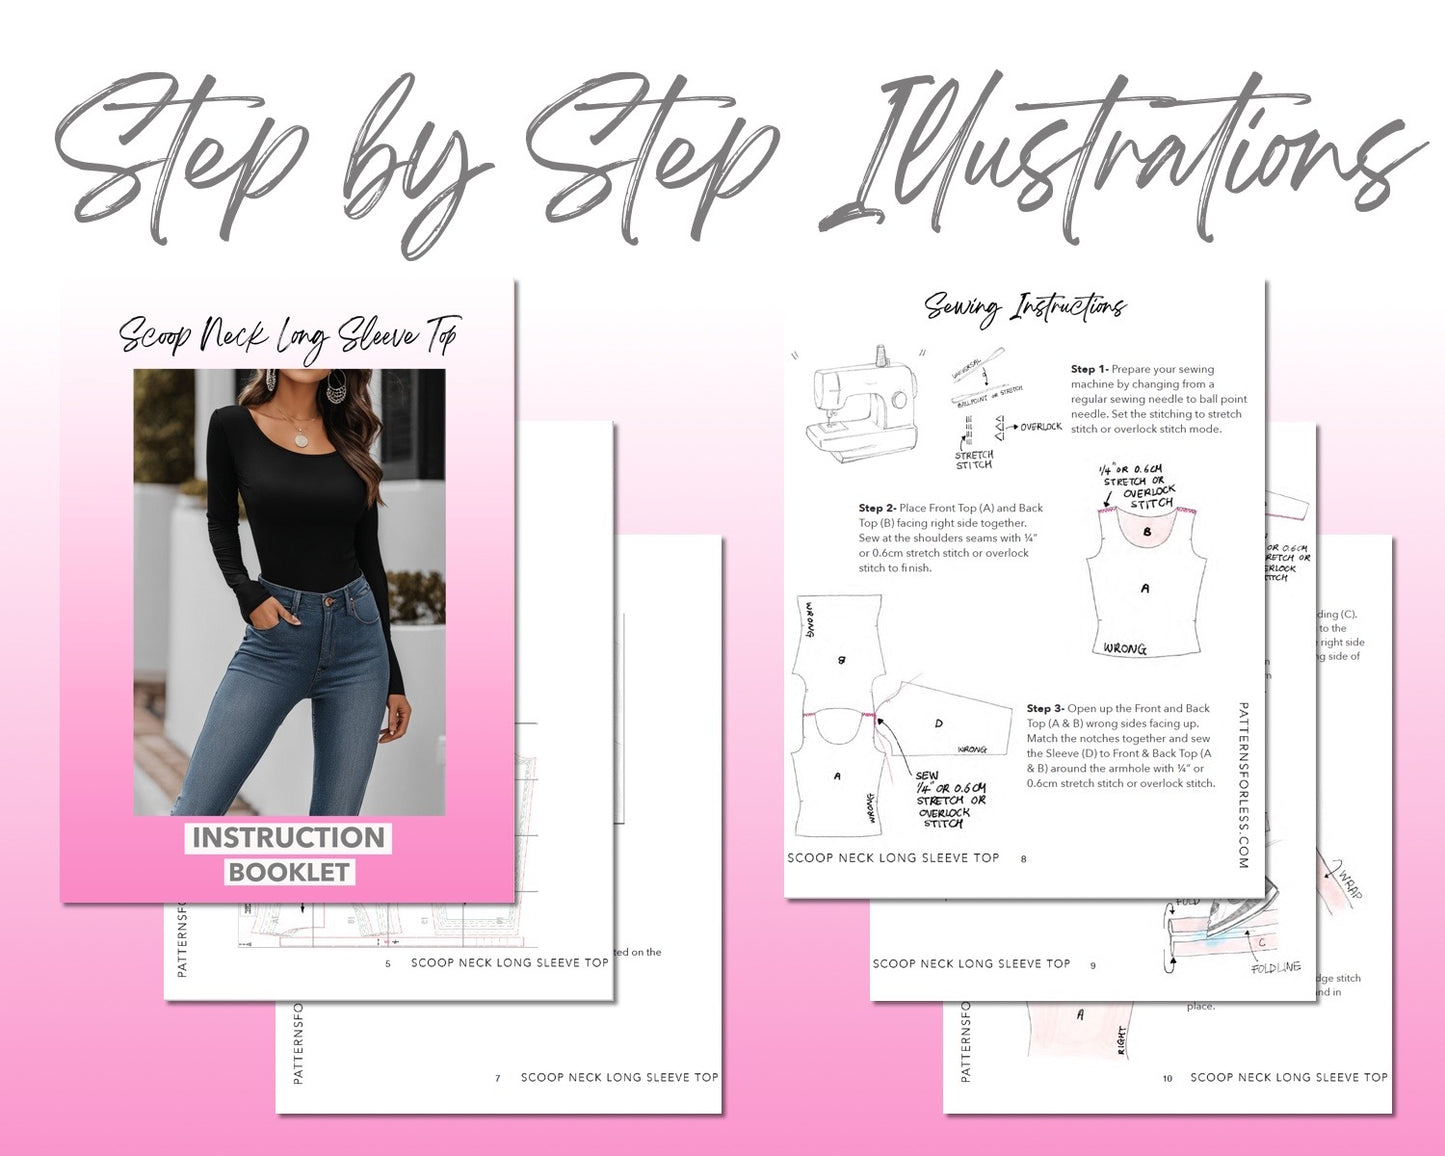 Scoop Neck Long Sleeve Top sewing pattern step by step illustrations.